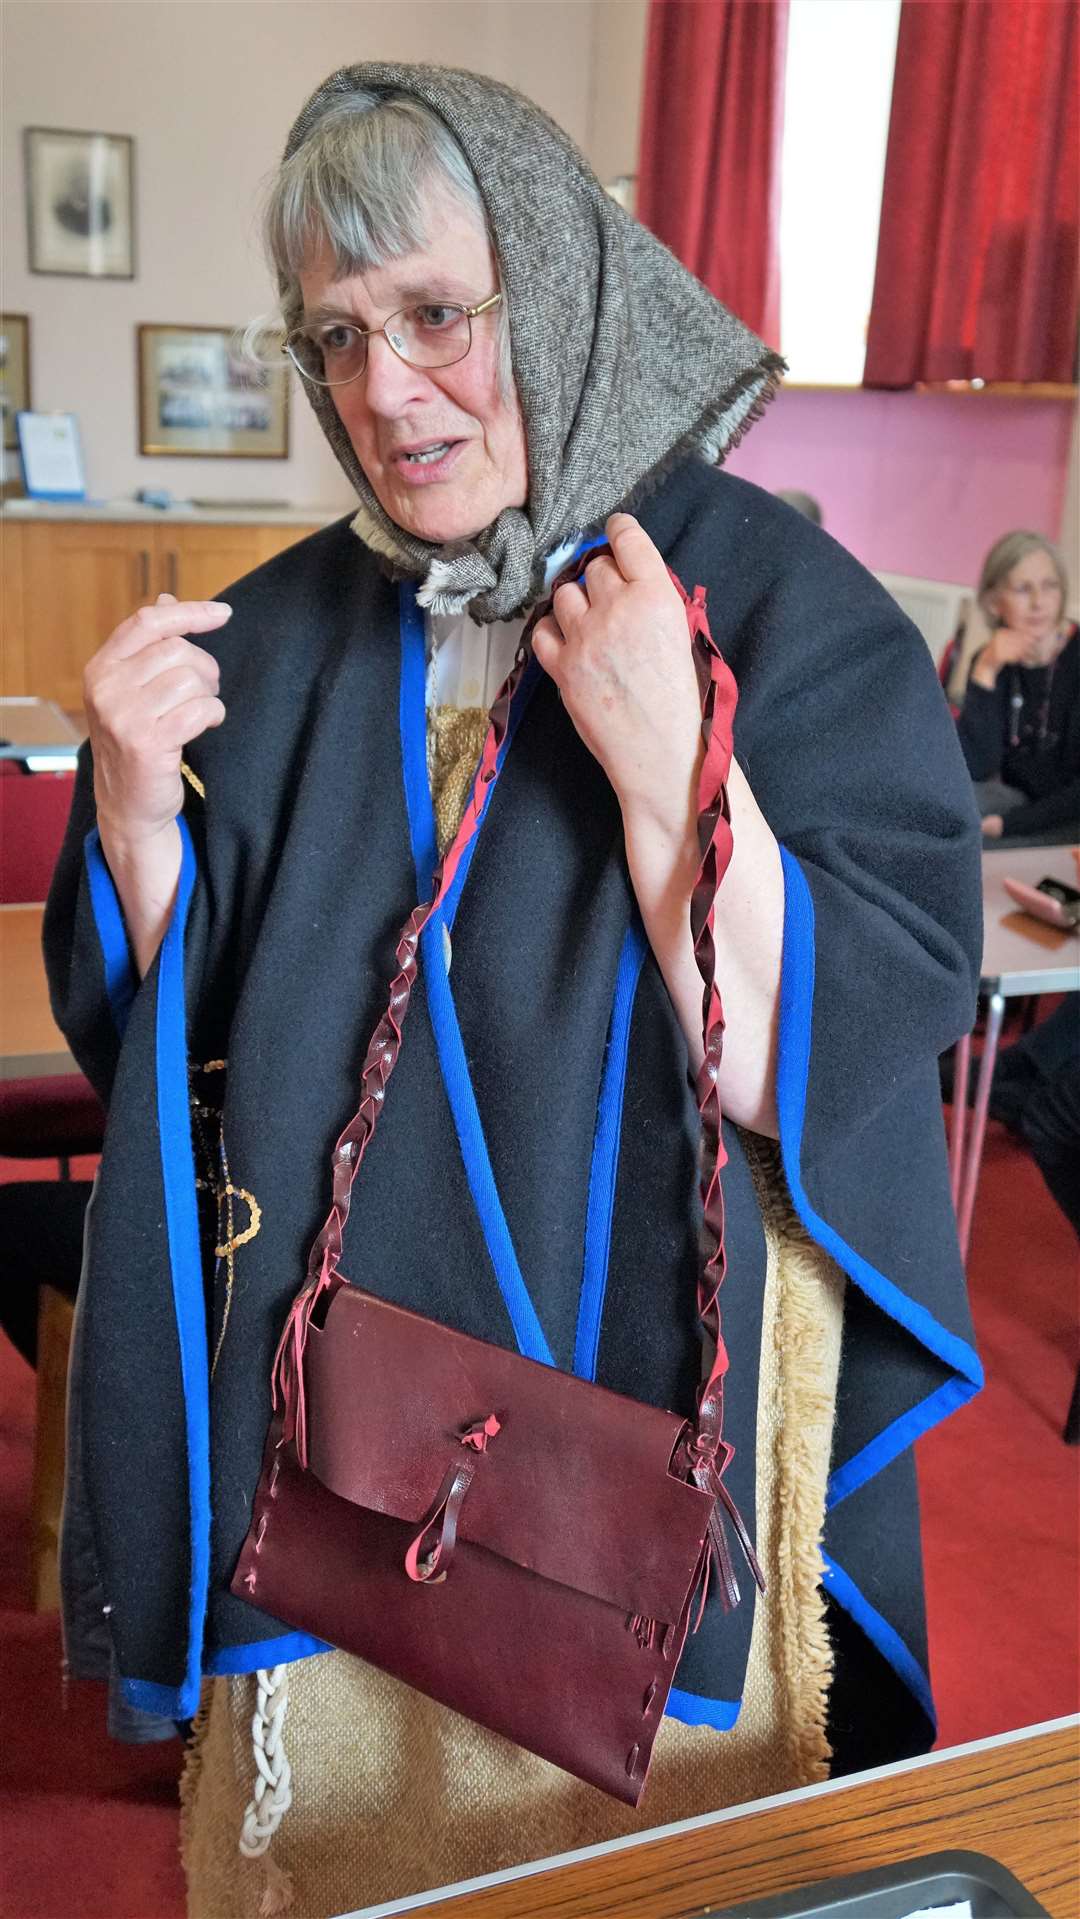 Jane Coll is secretary of the Northern Pilgrims' Way Group and had dressed appropriately for the occasion in medieval pilgrim's attire. Jane had stitched together shoes and a bag out of leather. Picture: DGS